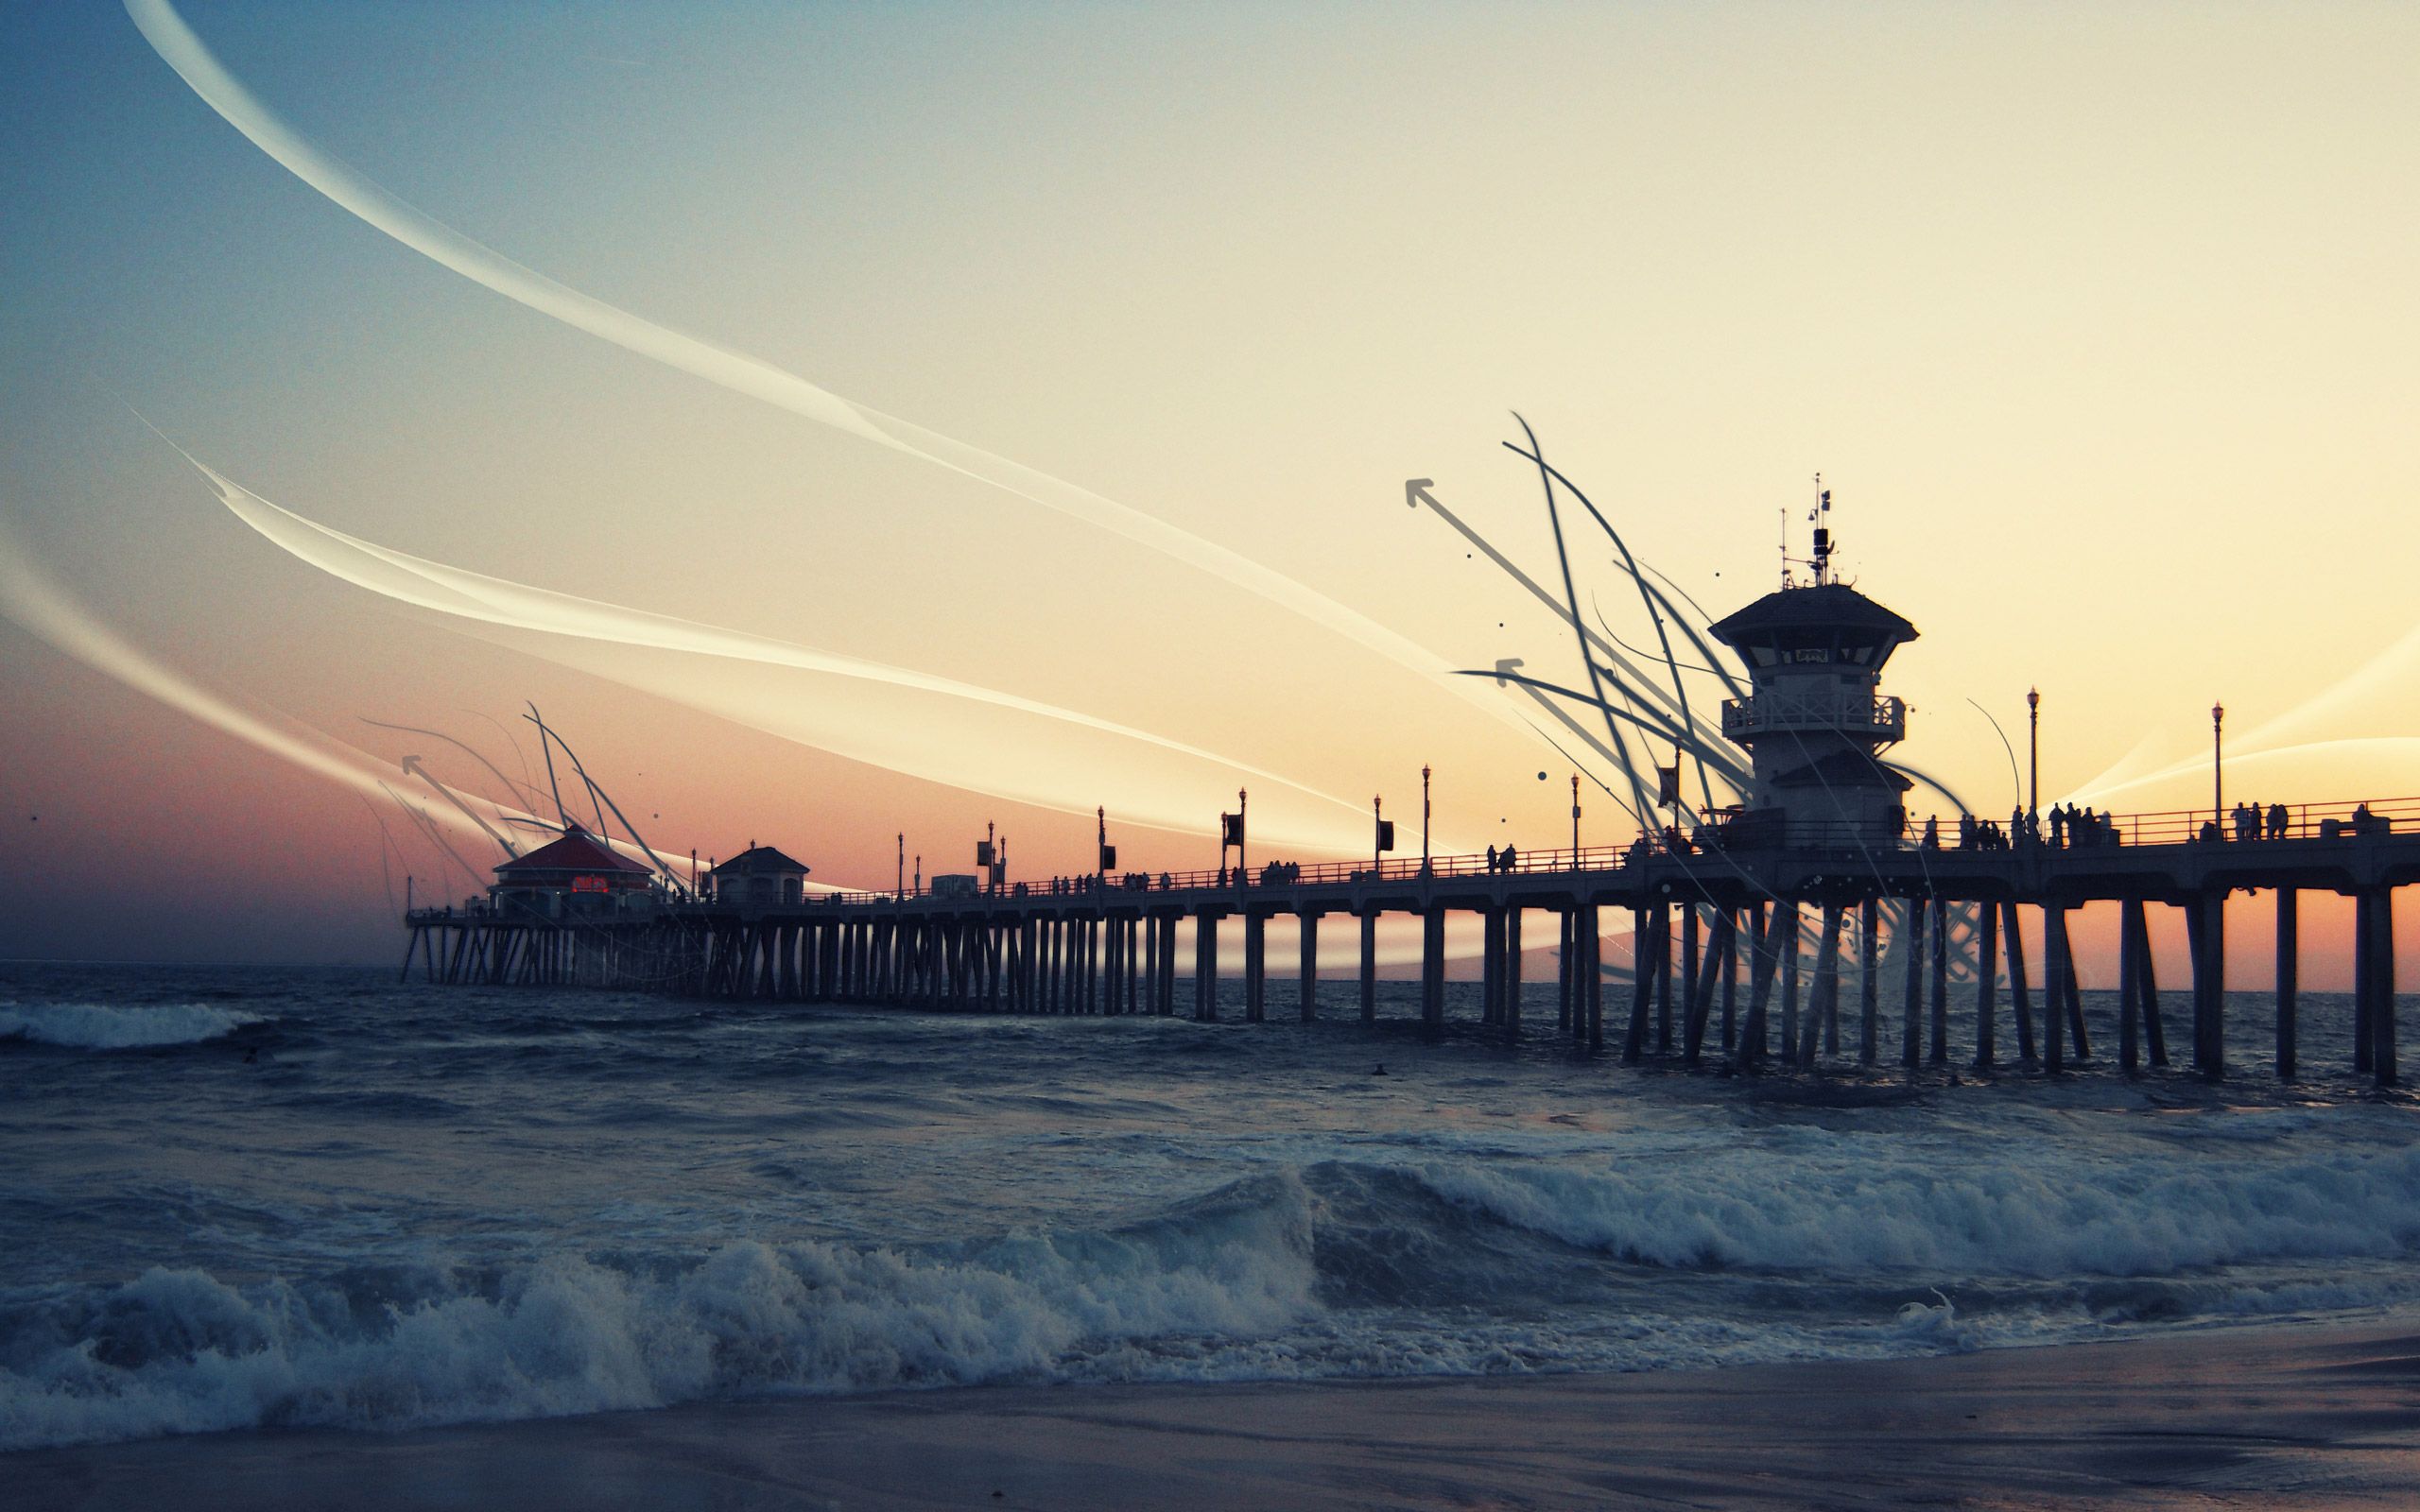 Free Download 42 HD California Wallpapers For Desktop And Mobile